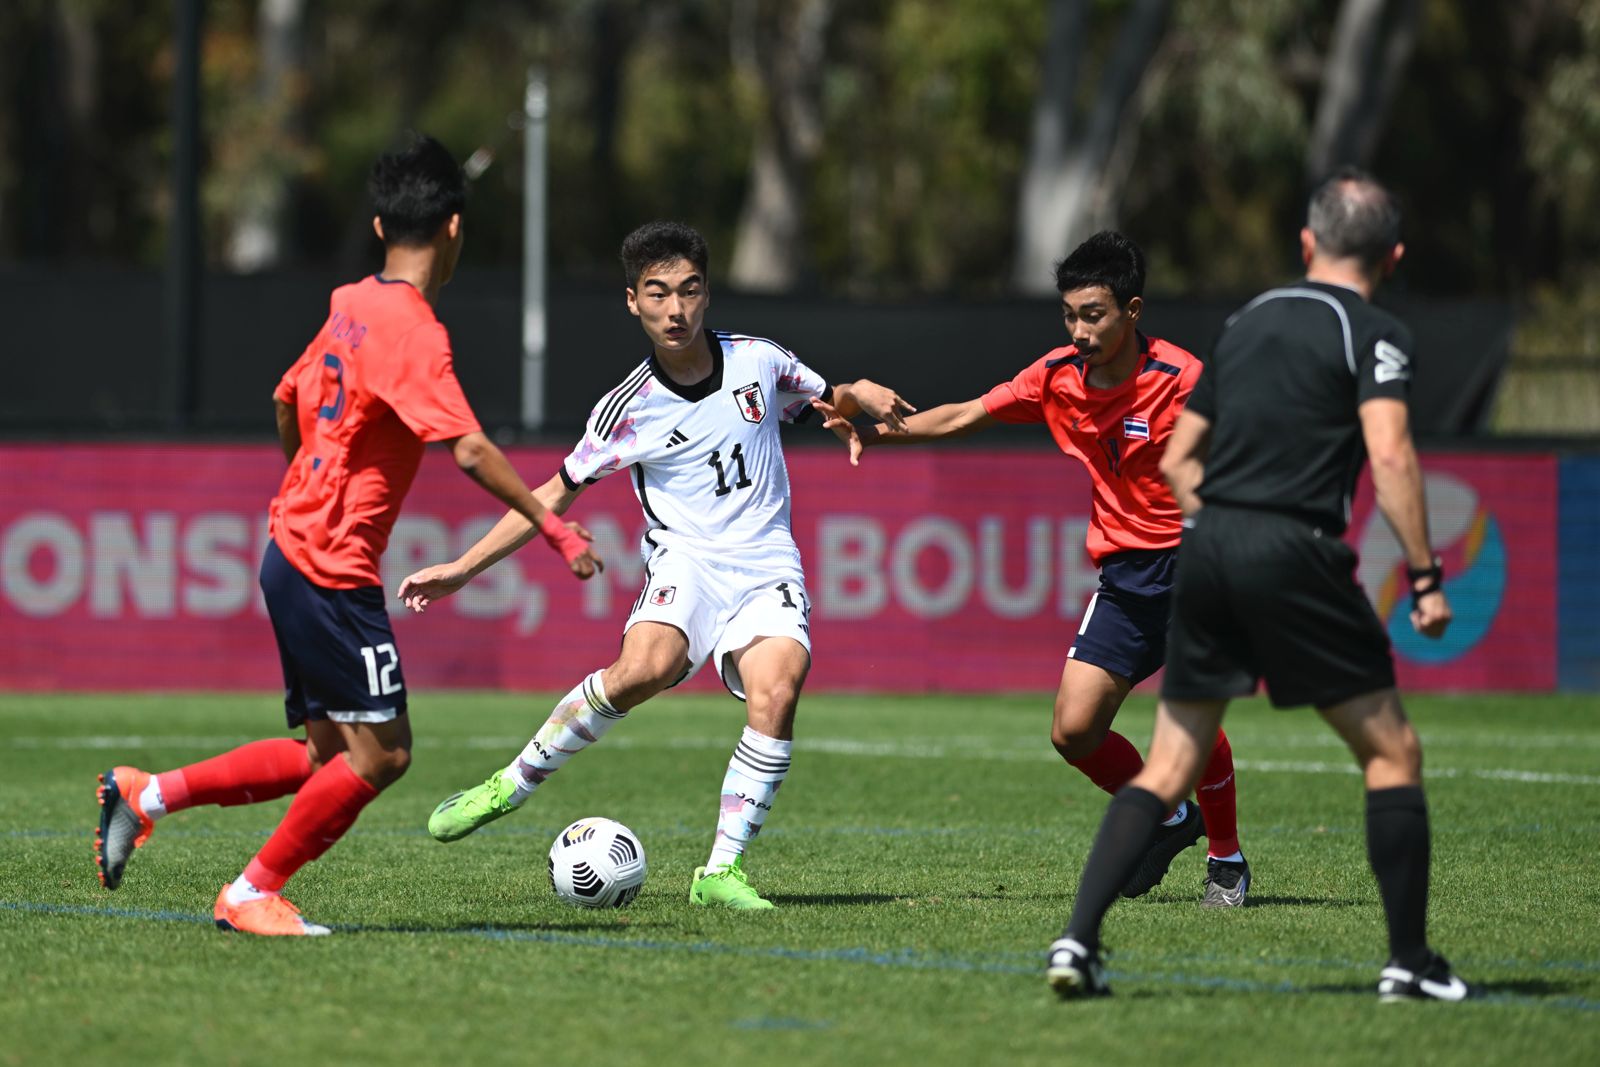 Hiroto Kageyama of Japan looks to find a pass in the IFCPF Asia Oceania Championships game against Thailand